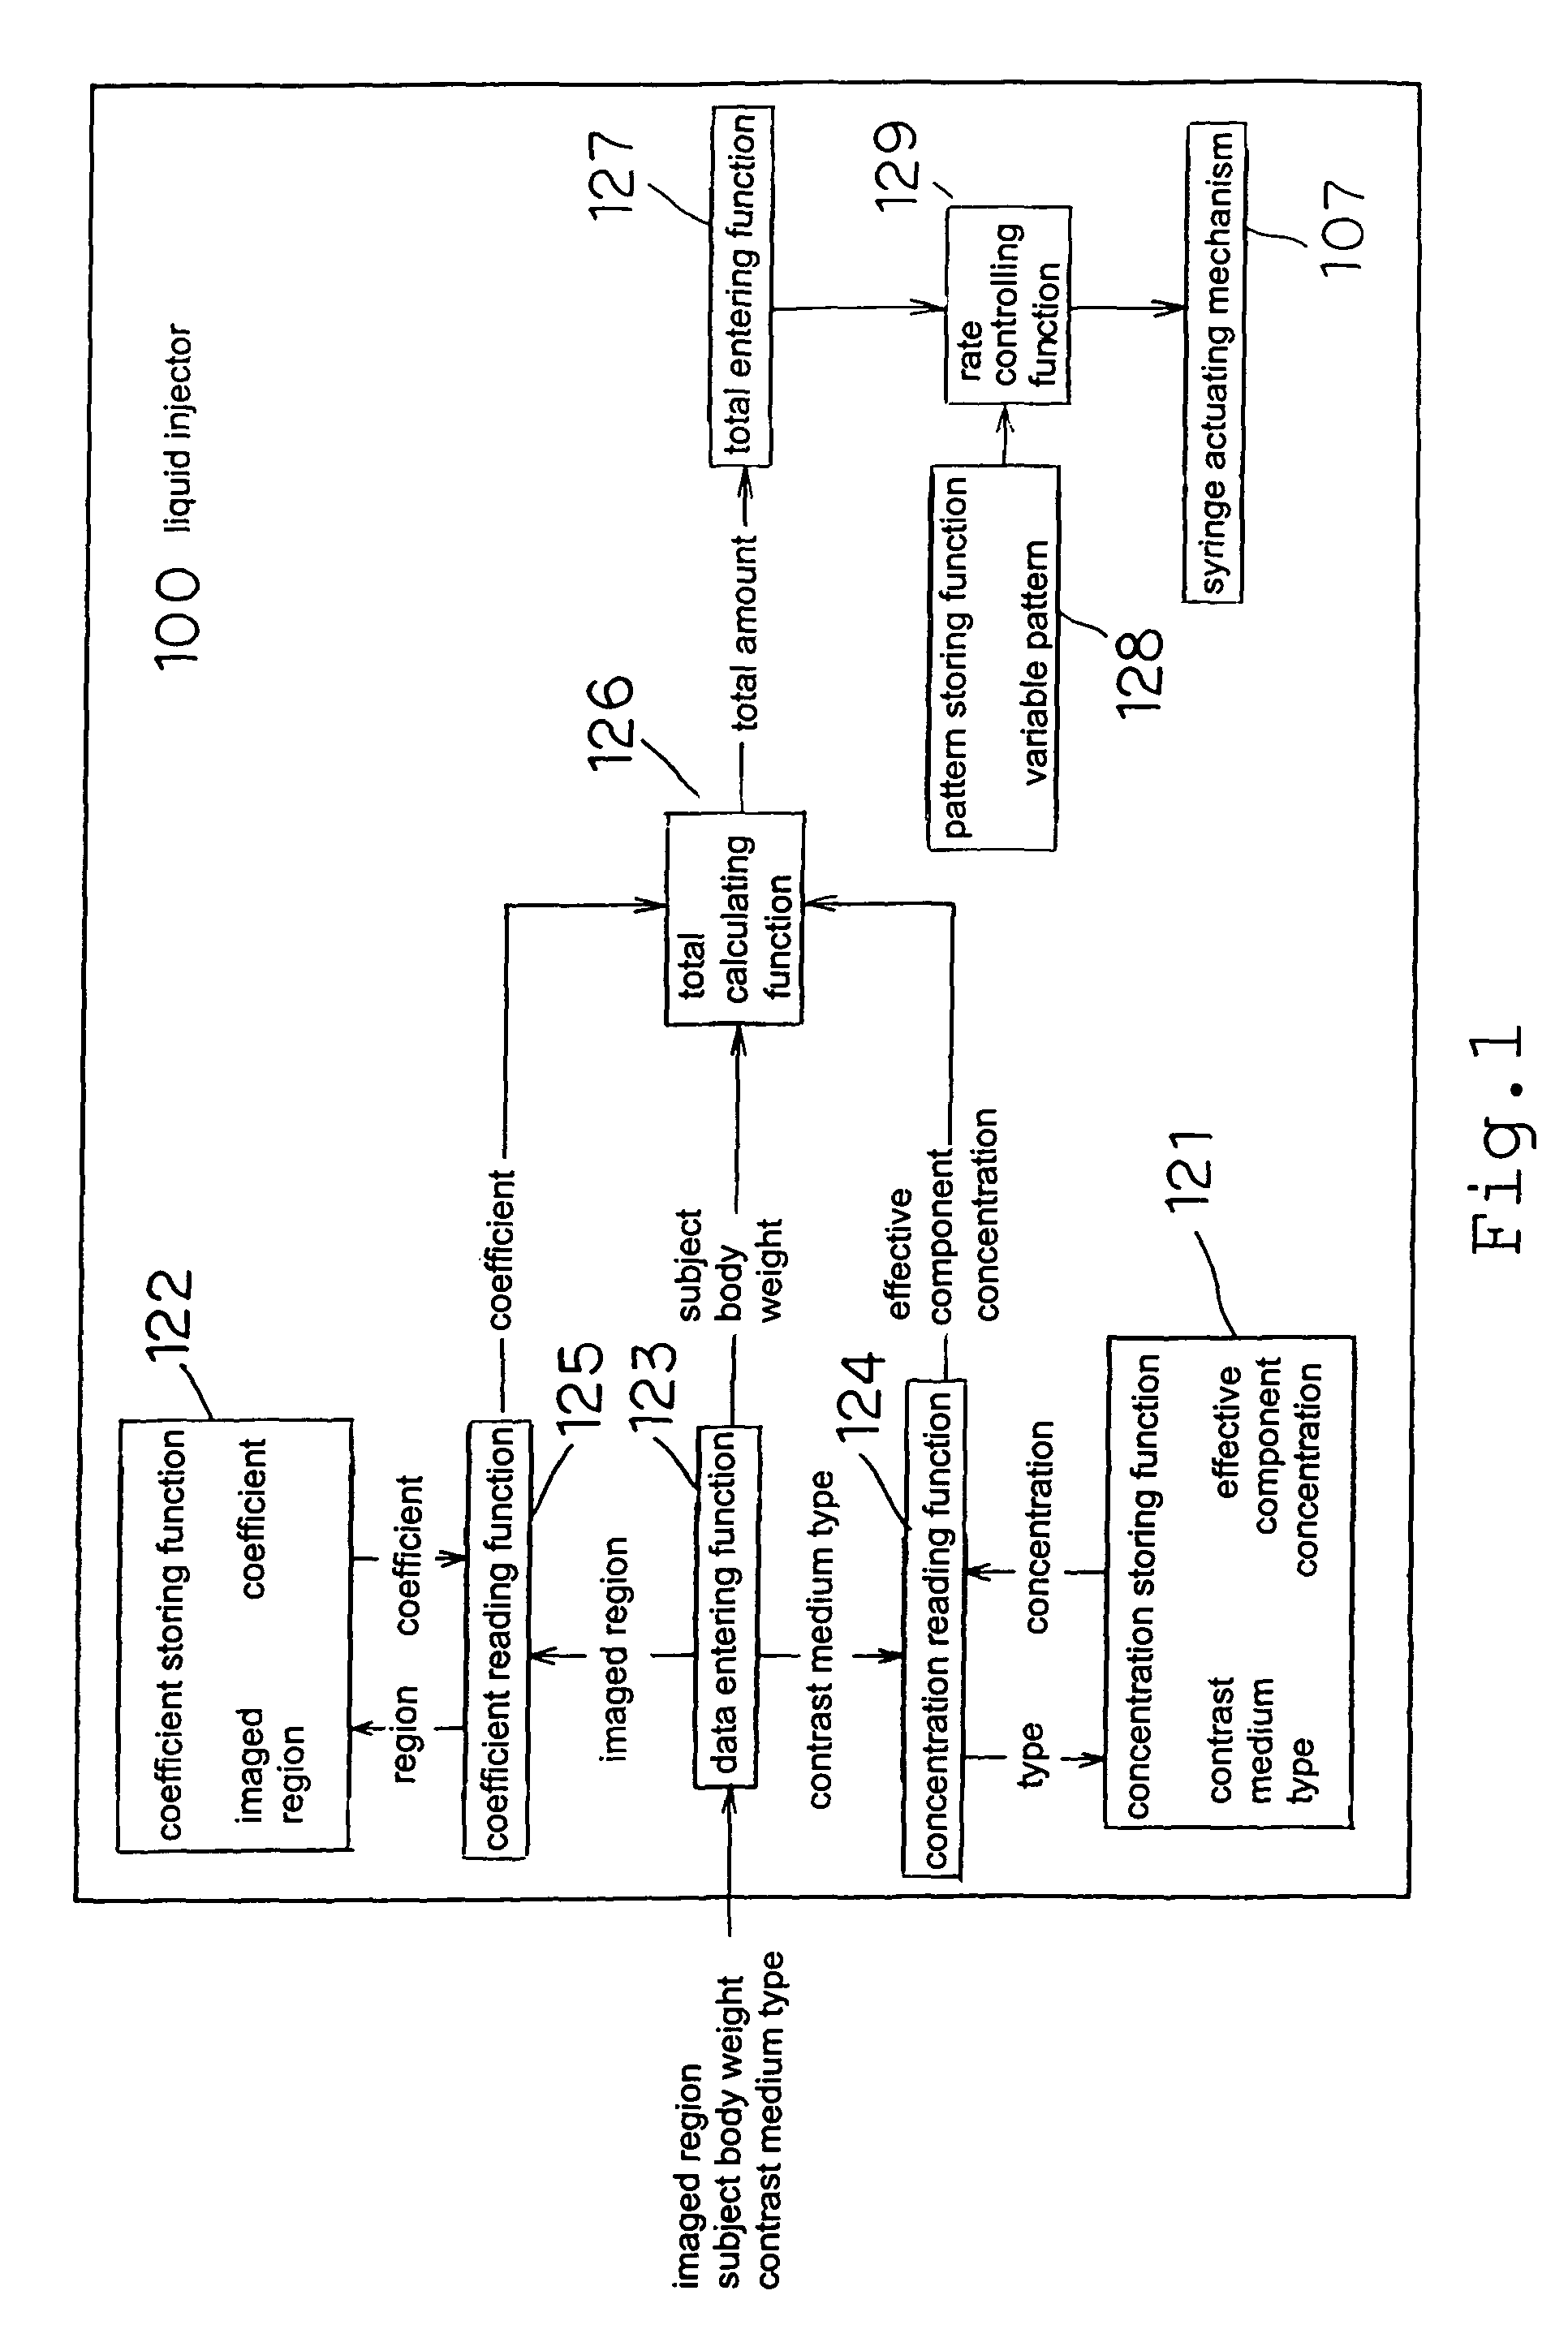 Liquid injector for injecting contrast medium at variable rate into a subject who is to be imaged by imaging diagnostic apparatus